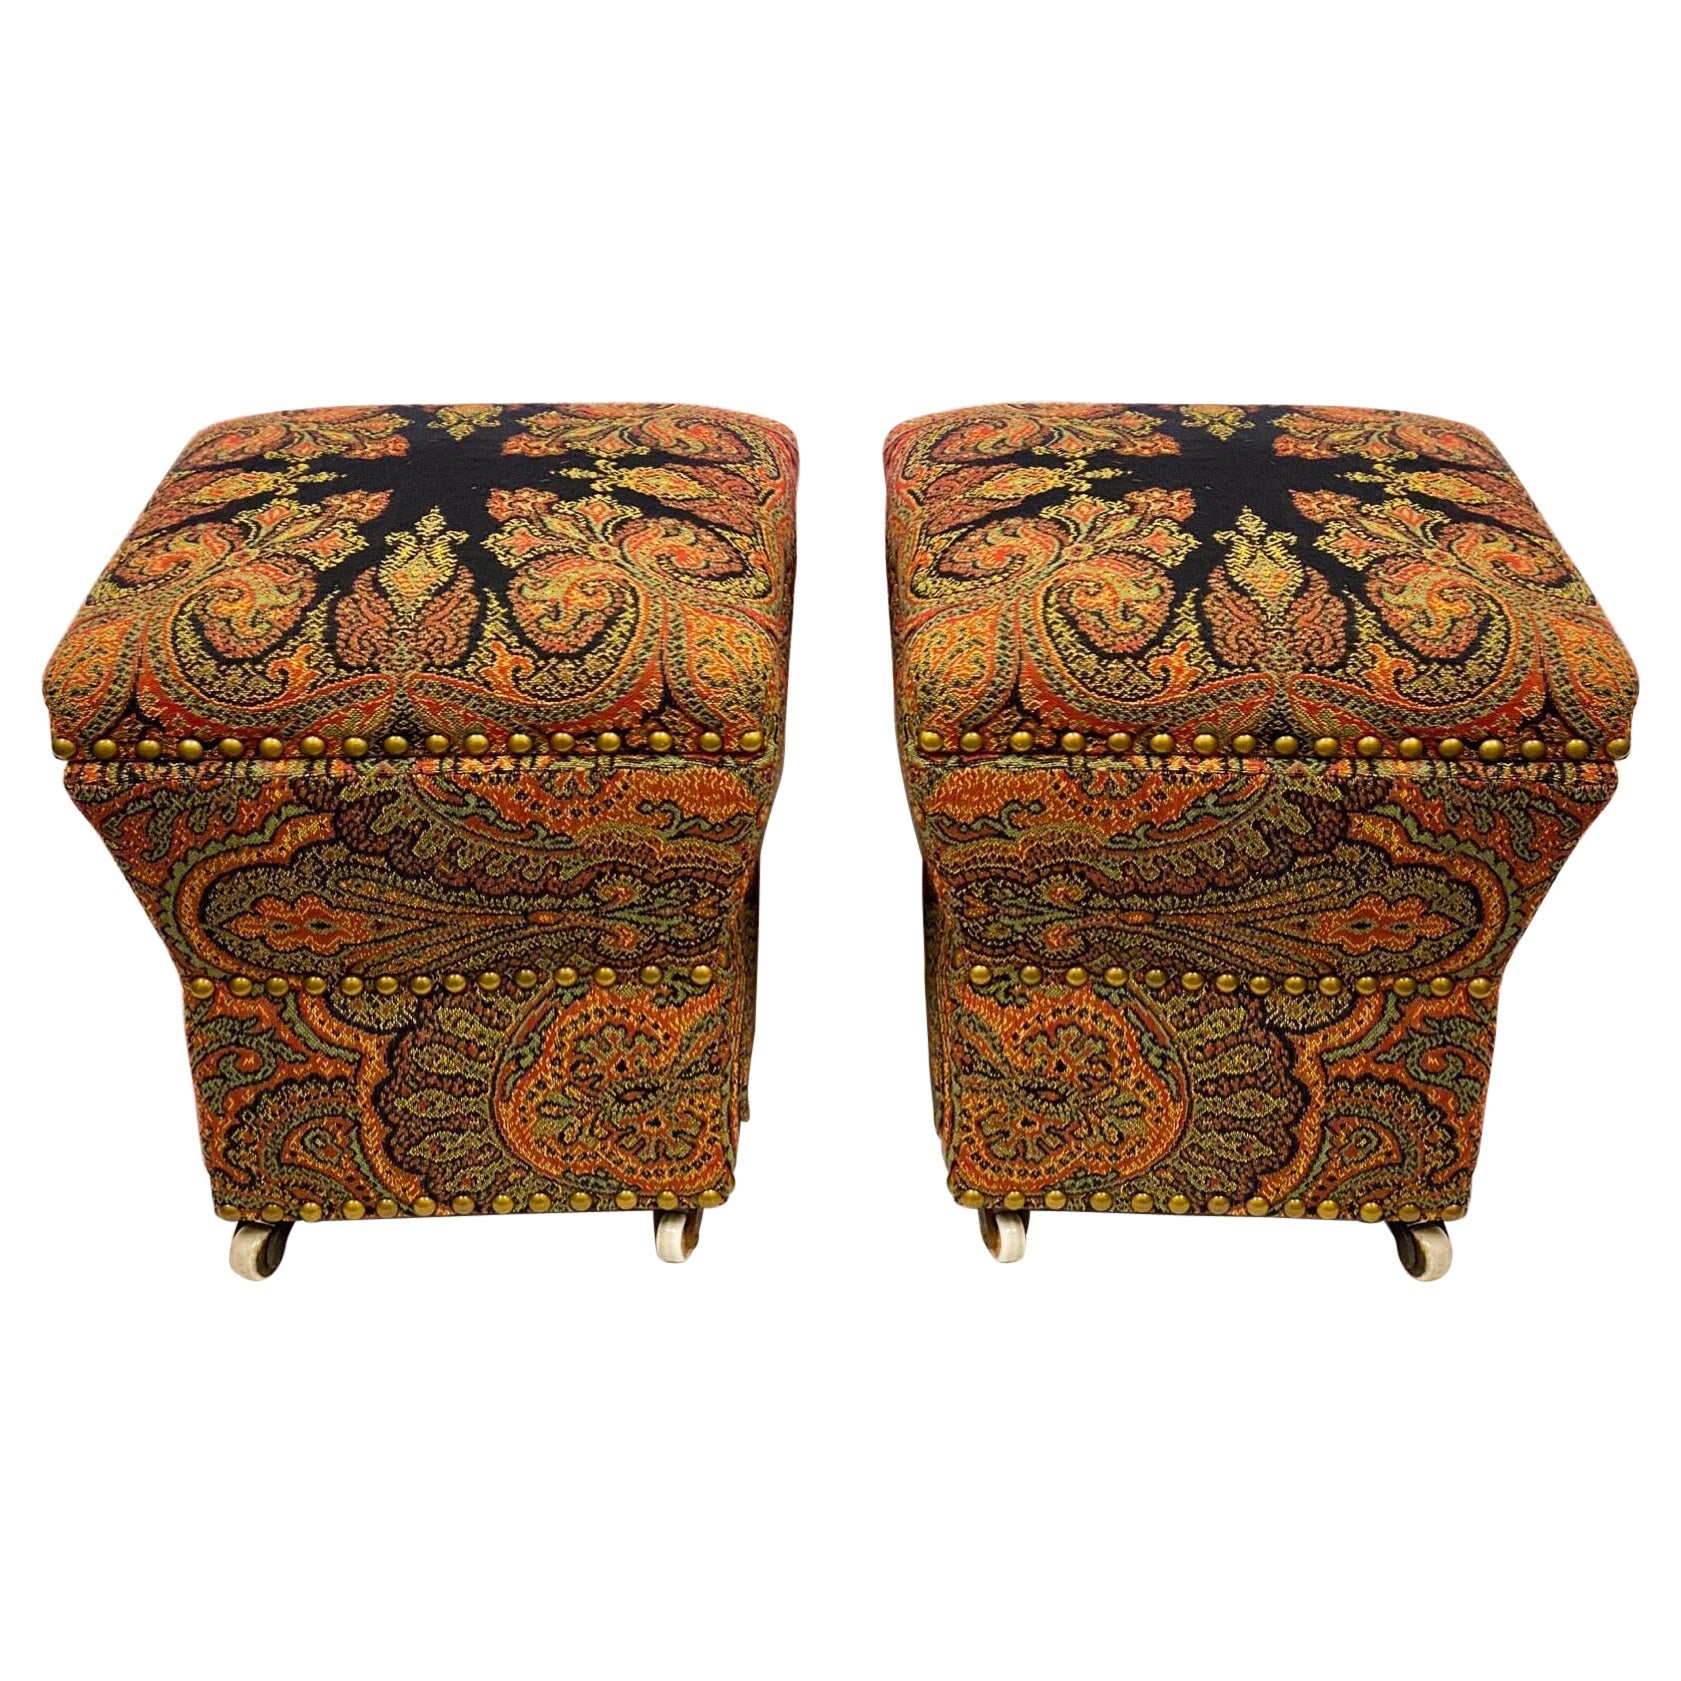 English Paisley Upholstered Storage Ottomans, a Pair For Sale